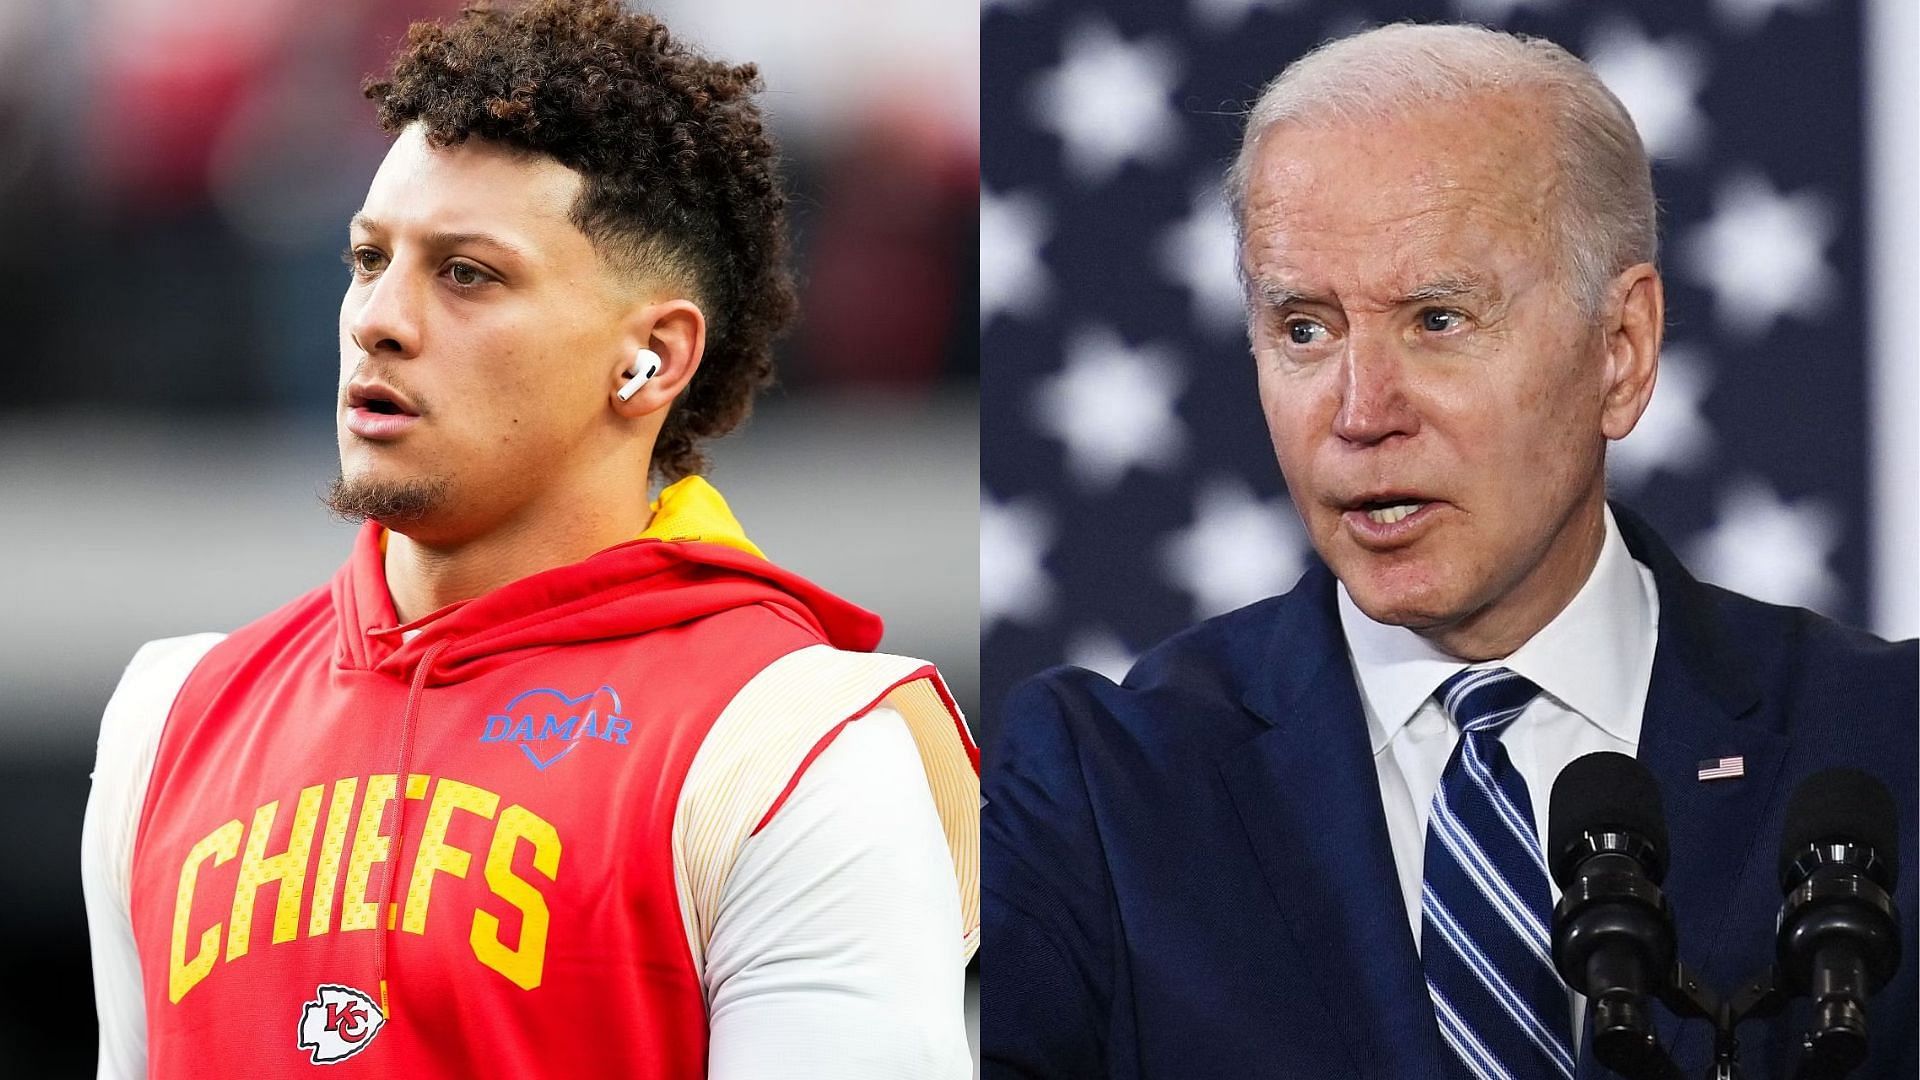 Patrick Mahomes and Chiefs get roasted by fans 